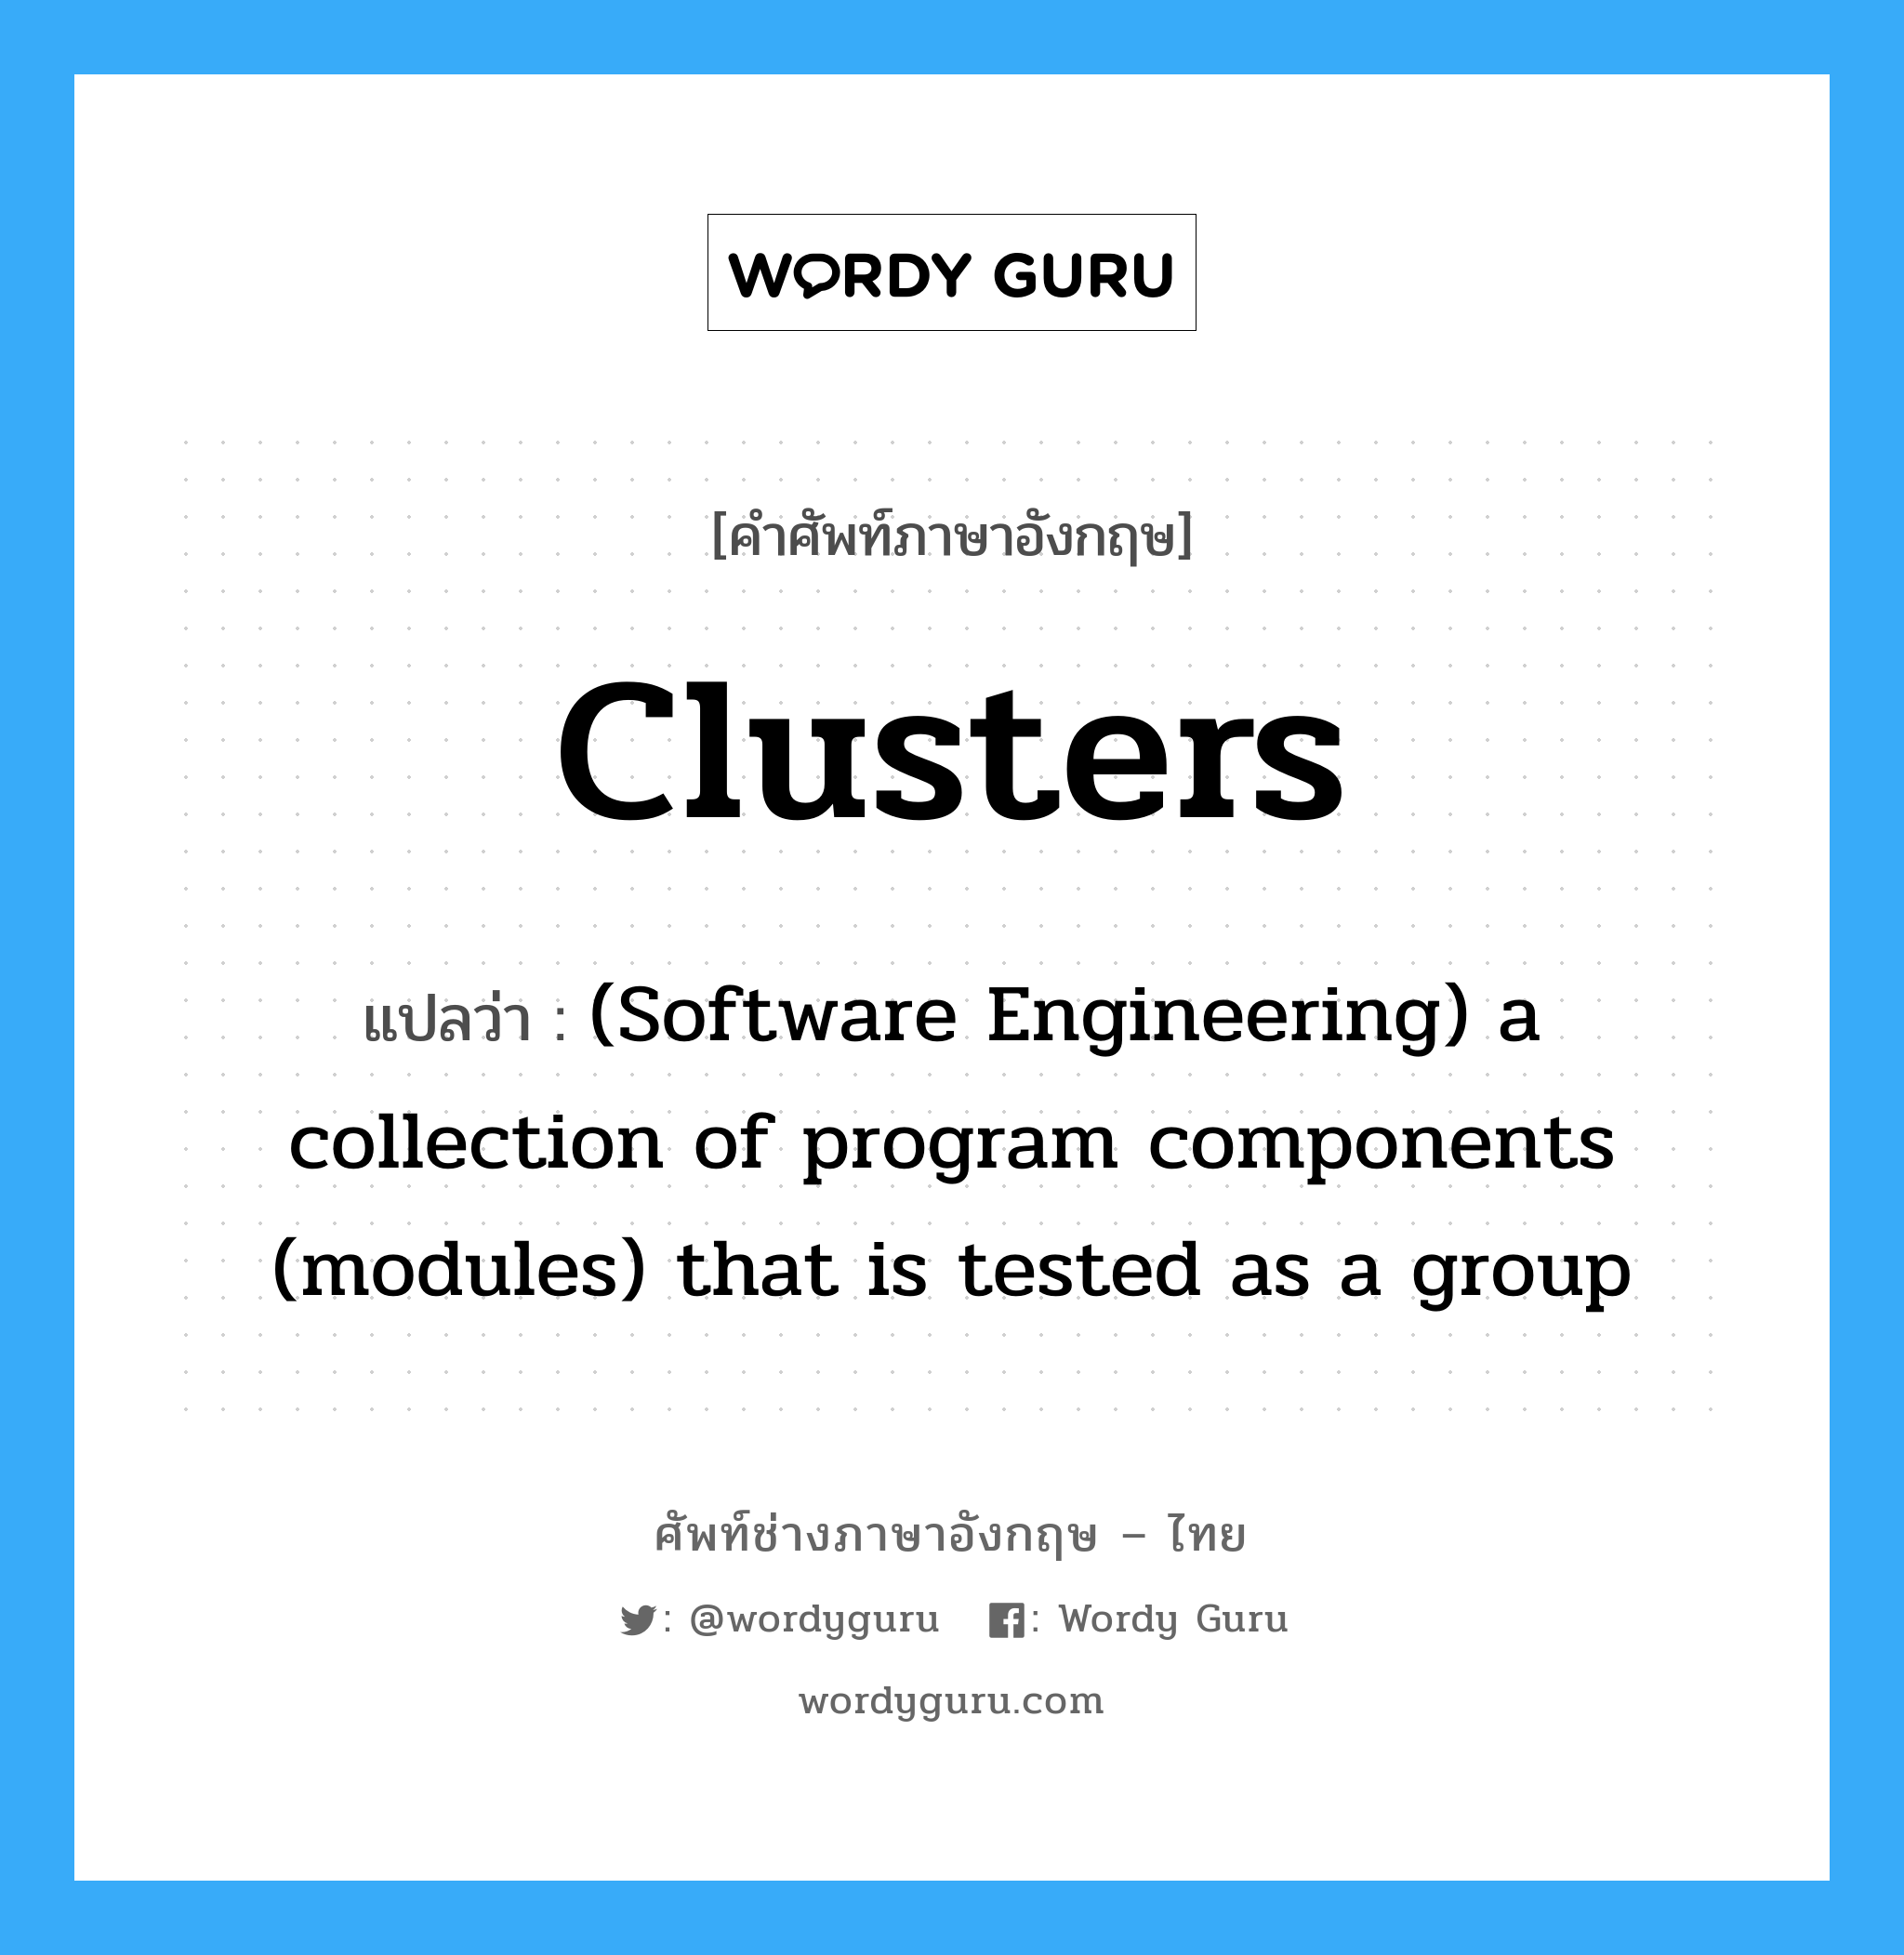 Clusters แปลว่า?, คำศัพท์ช่างภาษาอังกฤษ - ไทย Clusters คำศัพท์ภาษาอังกฤษ Clusters แปลว่า (Software Engineering) a collection of program components (modules) that is tested as a group